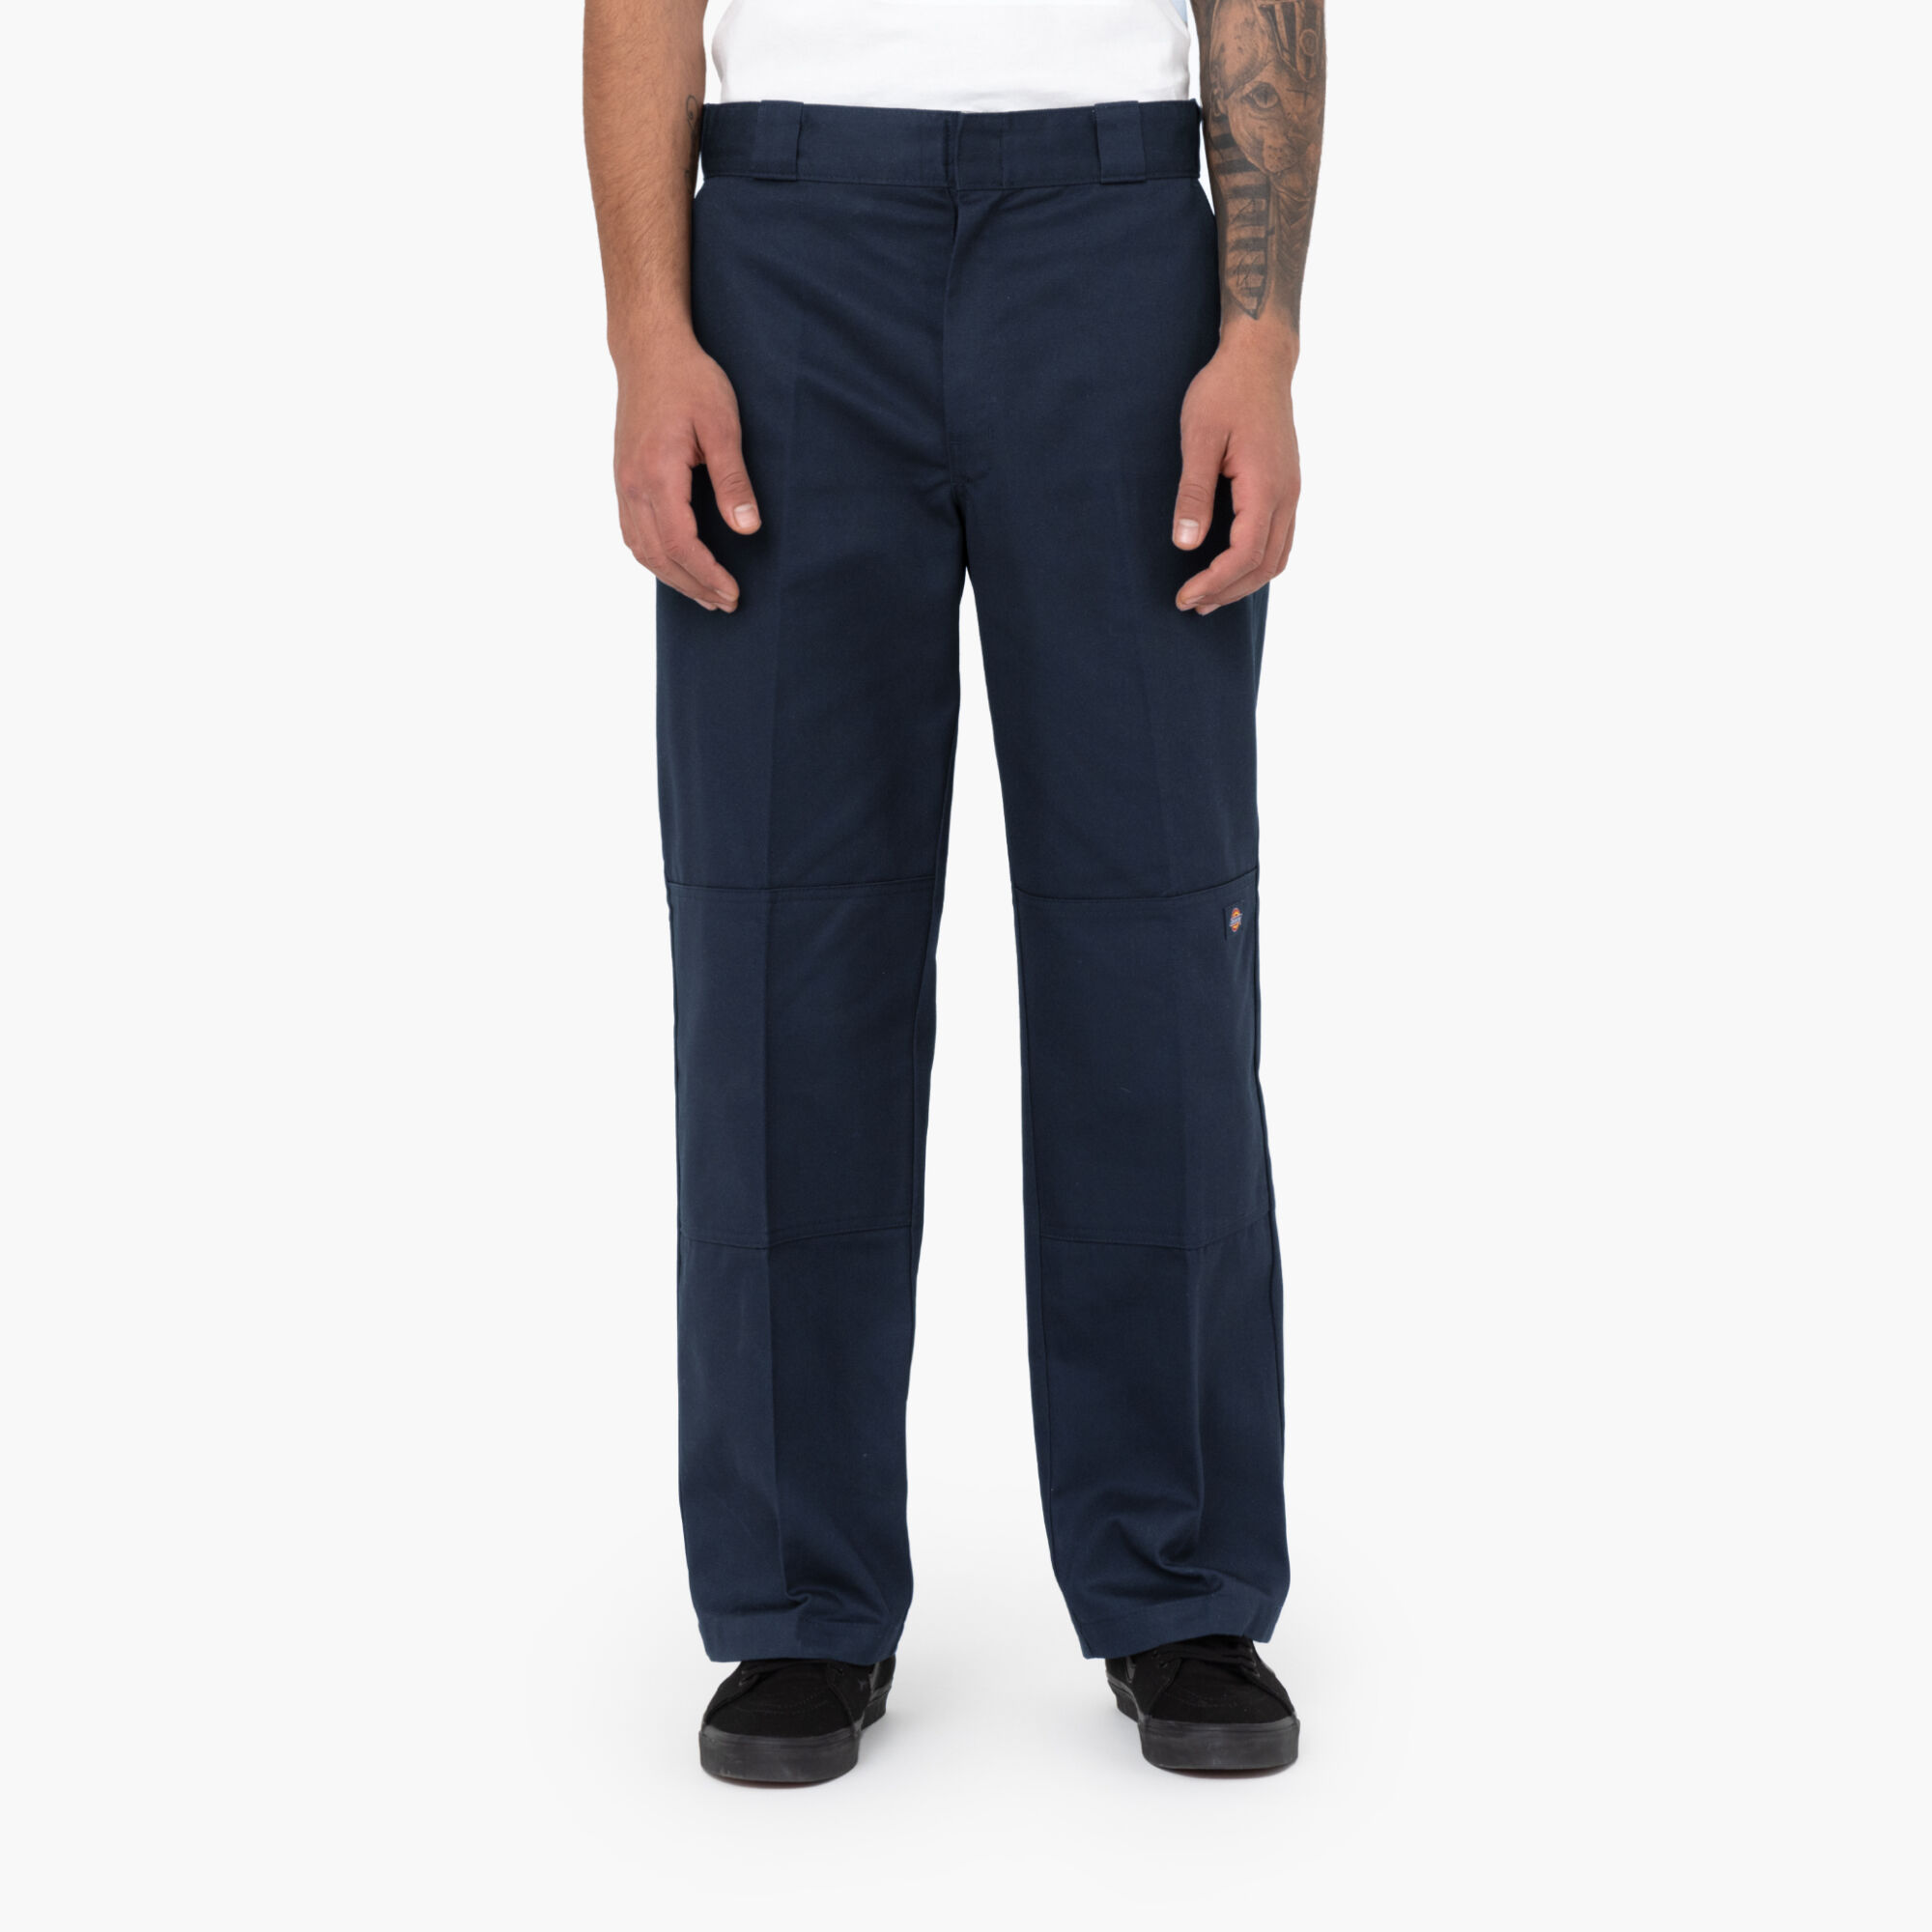 Peter England cream doubleside round insert front pockets with jetted back  pocket comfort fit cotton trousers